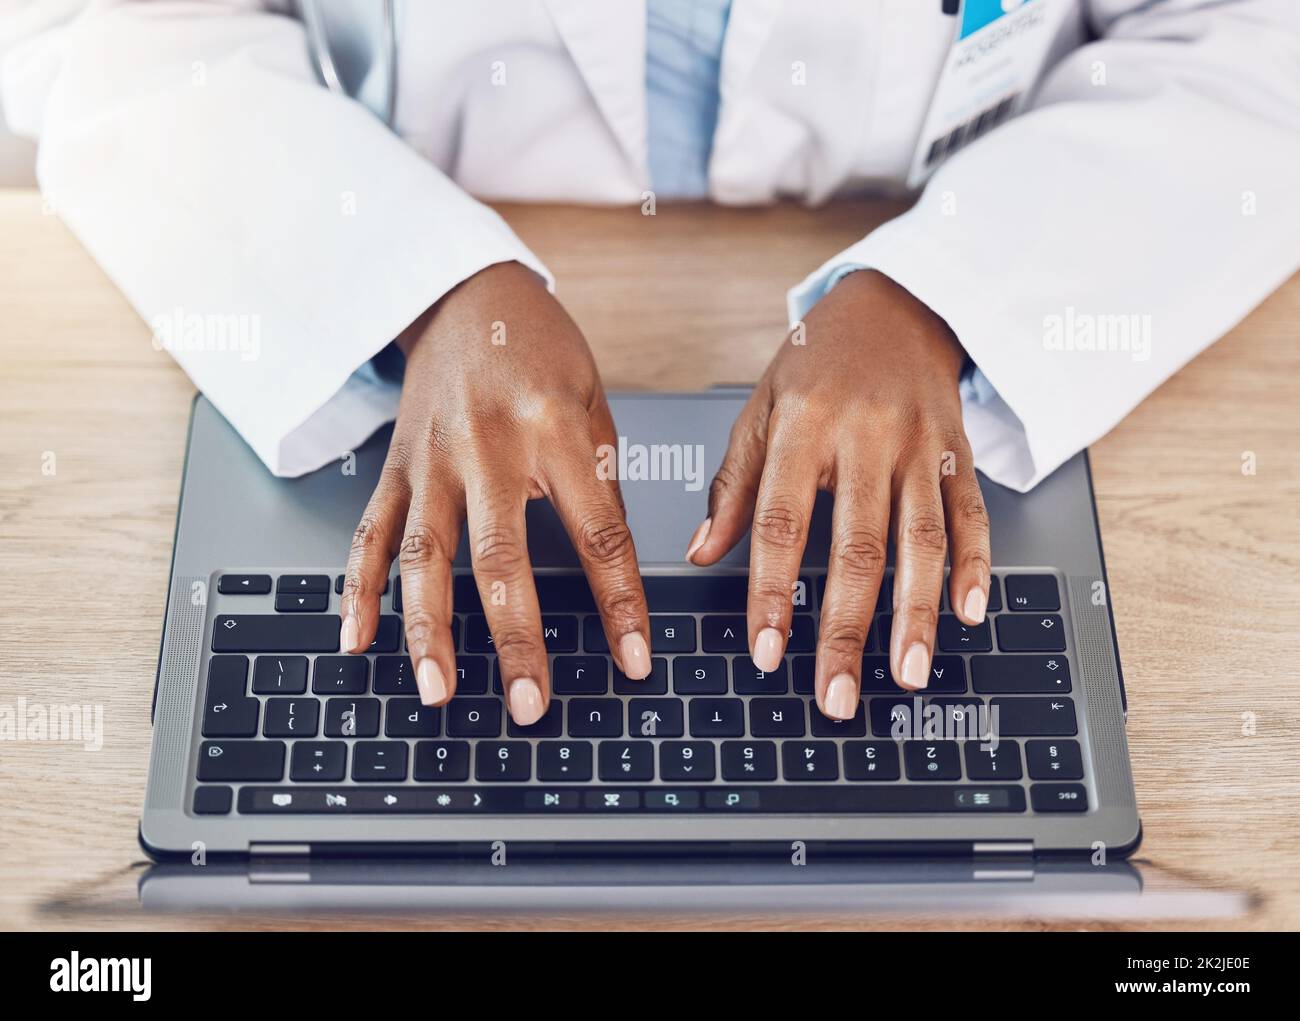 Hands, woman and doctor with laptop working at a desk in a hospital office. Medical expert with wireless technology to diagnose or research diseases Stock Photo